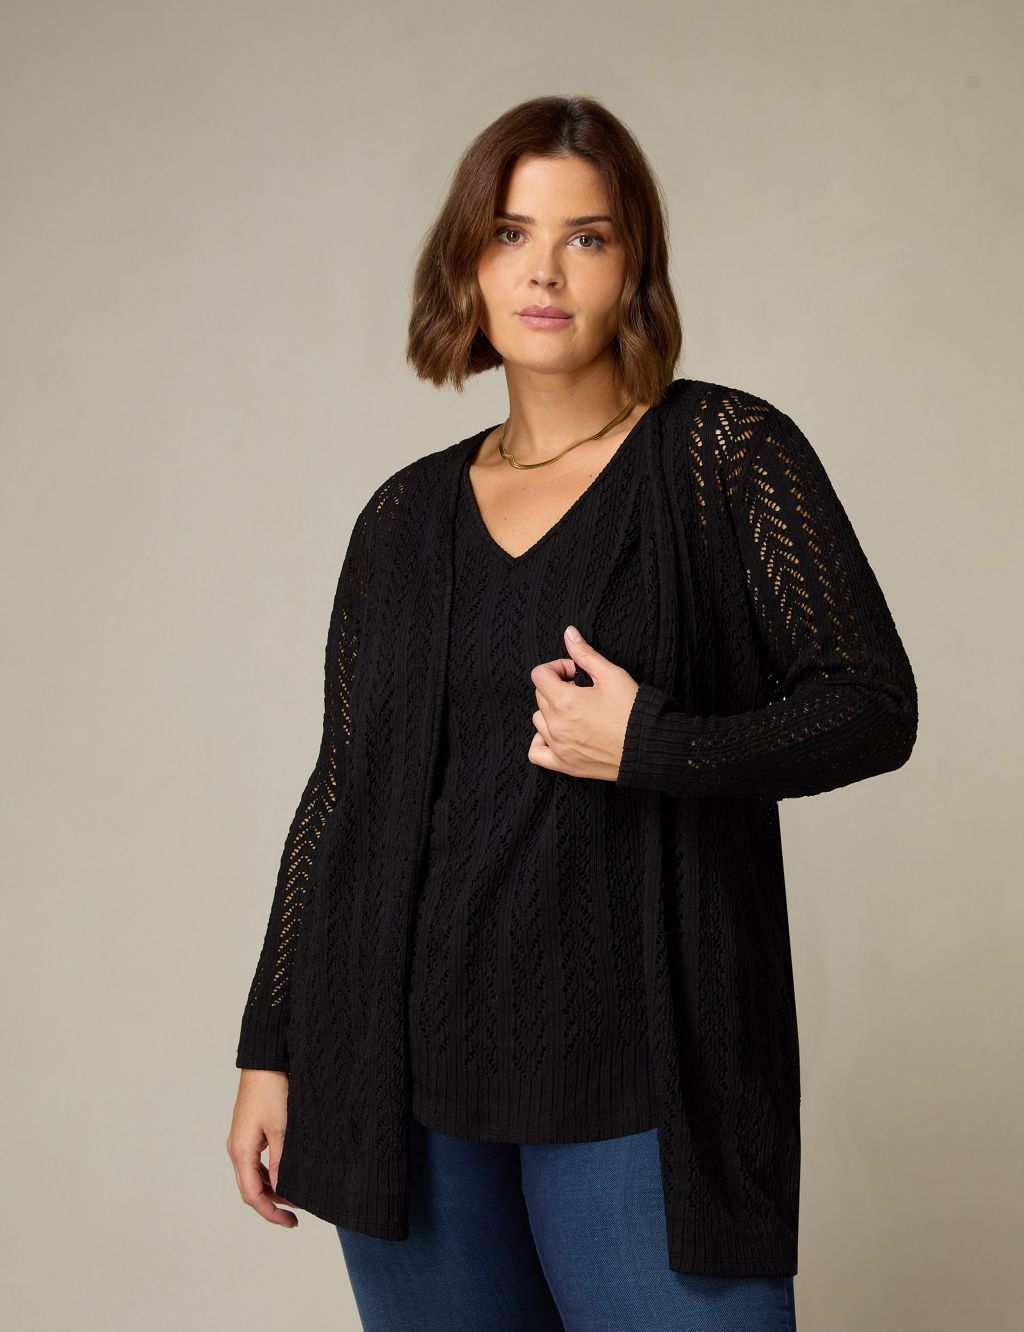 Crochet Knitted Relaxed Cardigan image 1